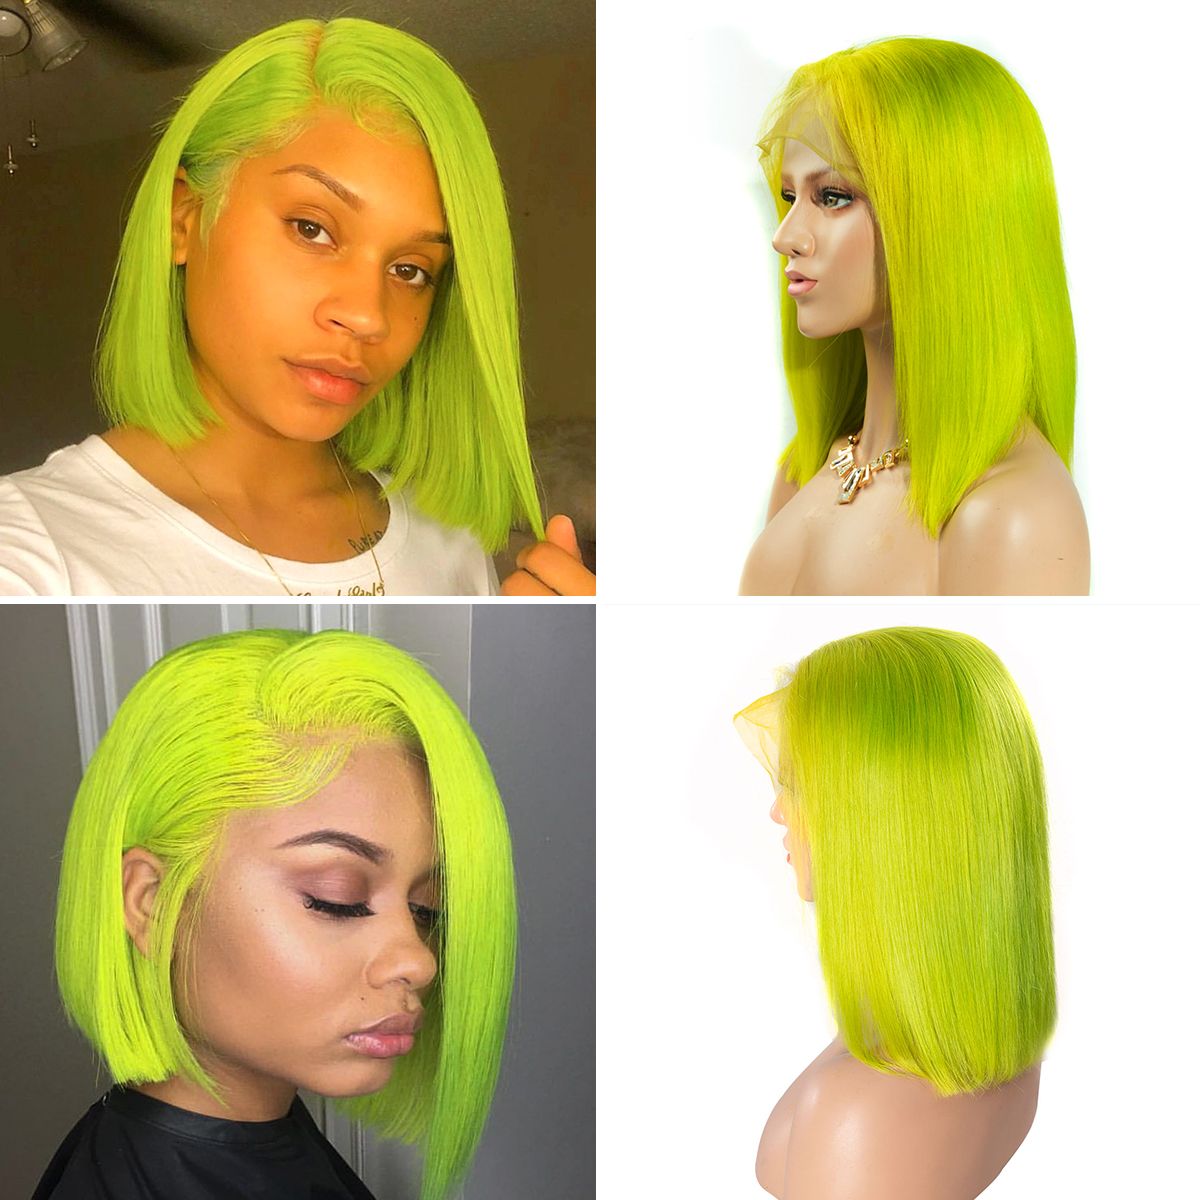 13 colorful short bob striaight hair wigs lime green